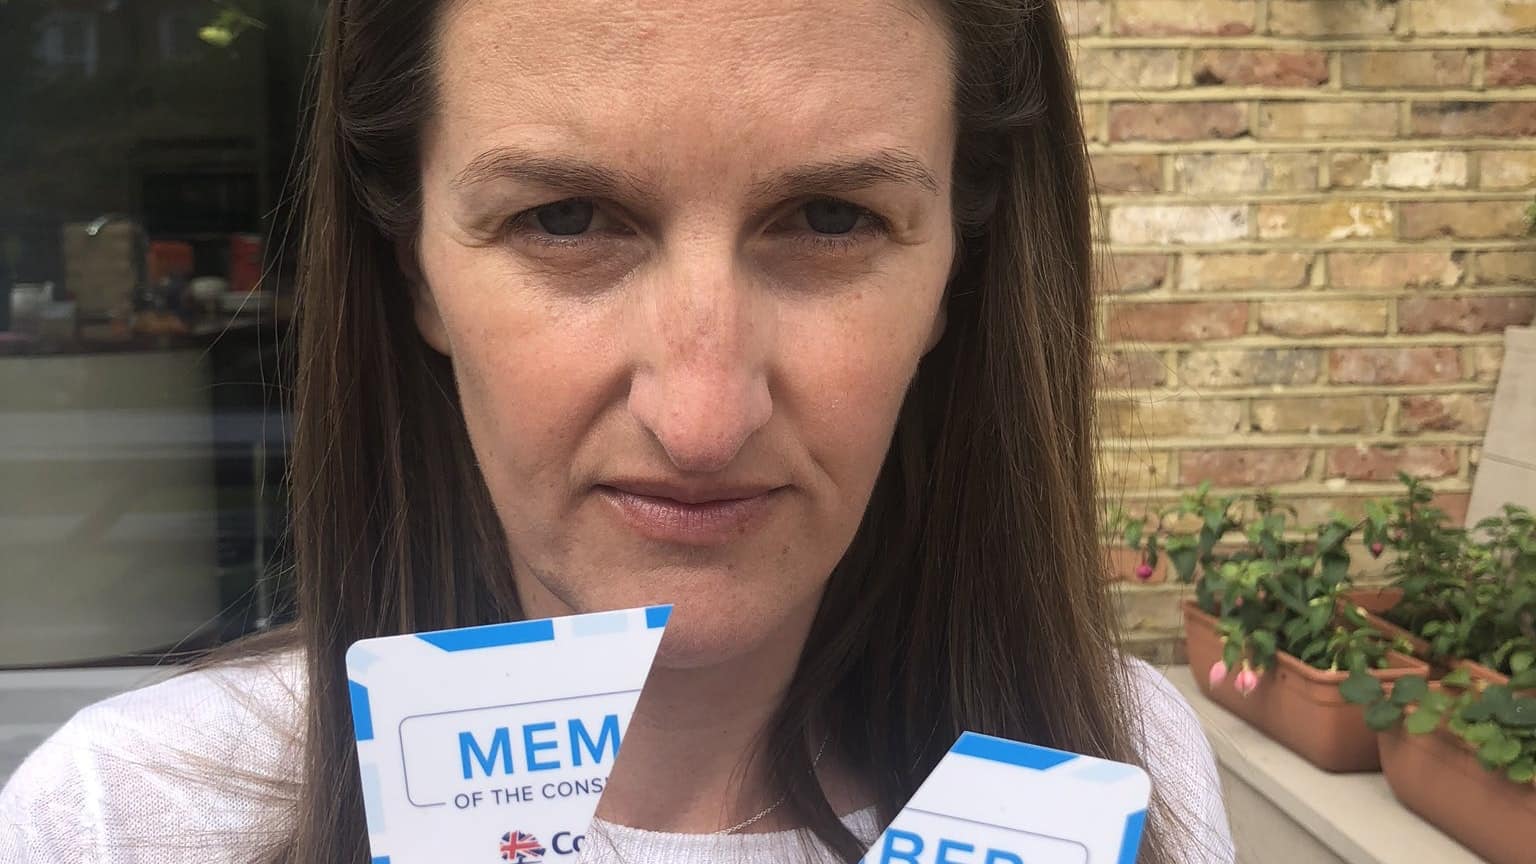 Tories cut up membership cards in protest over new face mask rules